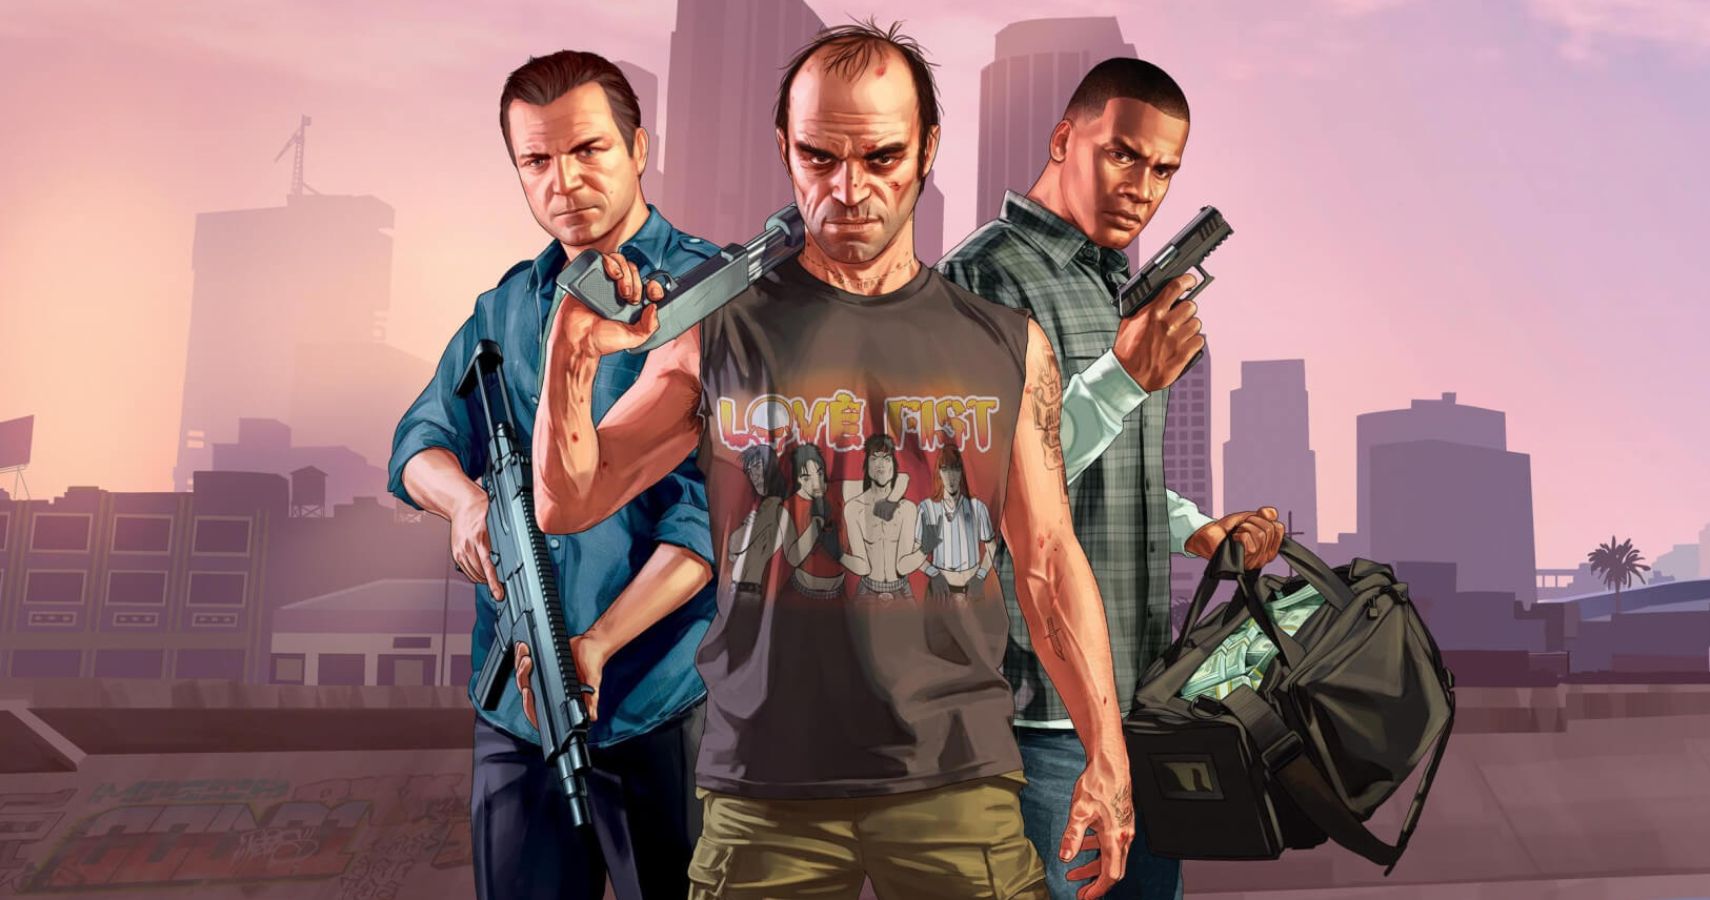 GTA V is getting story DLC for the first time, kind of